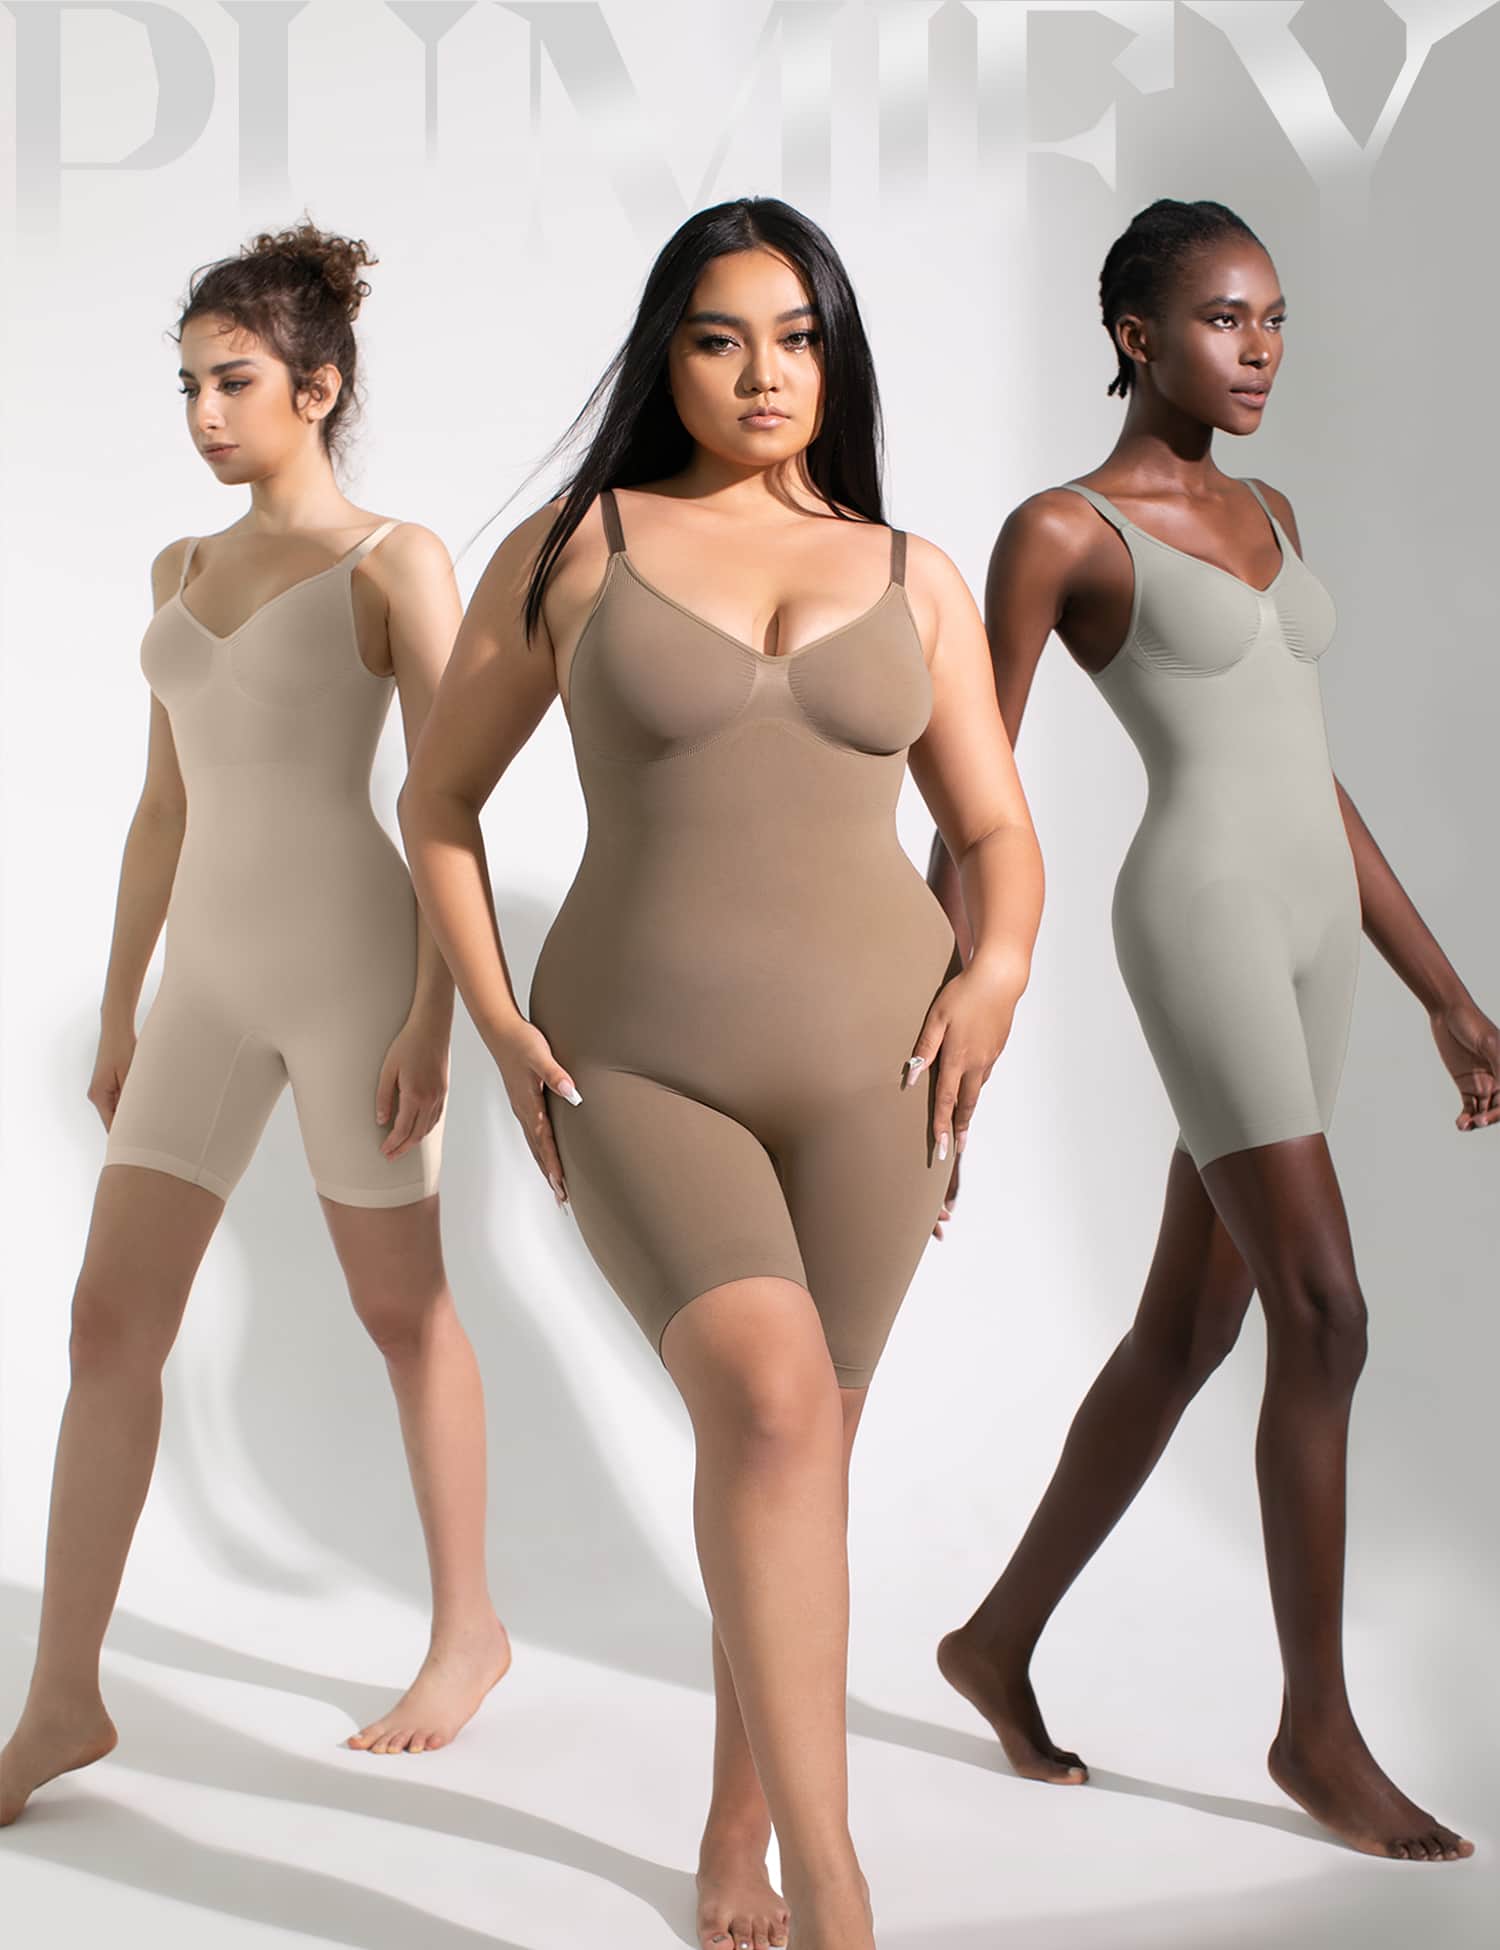 Shapewear Is Bringing Confidence to Women All Over Thanks to Skims - GREY  Journal